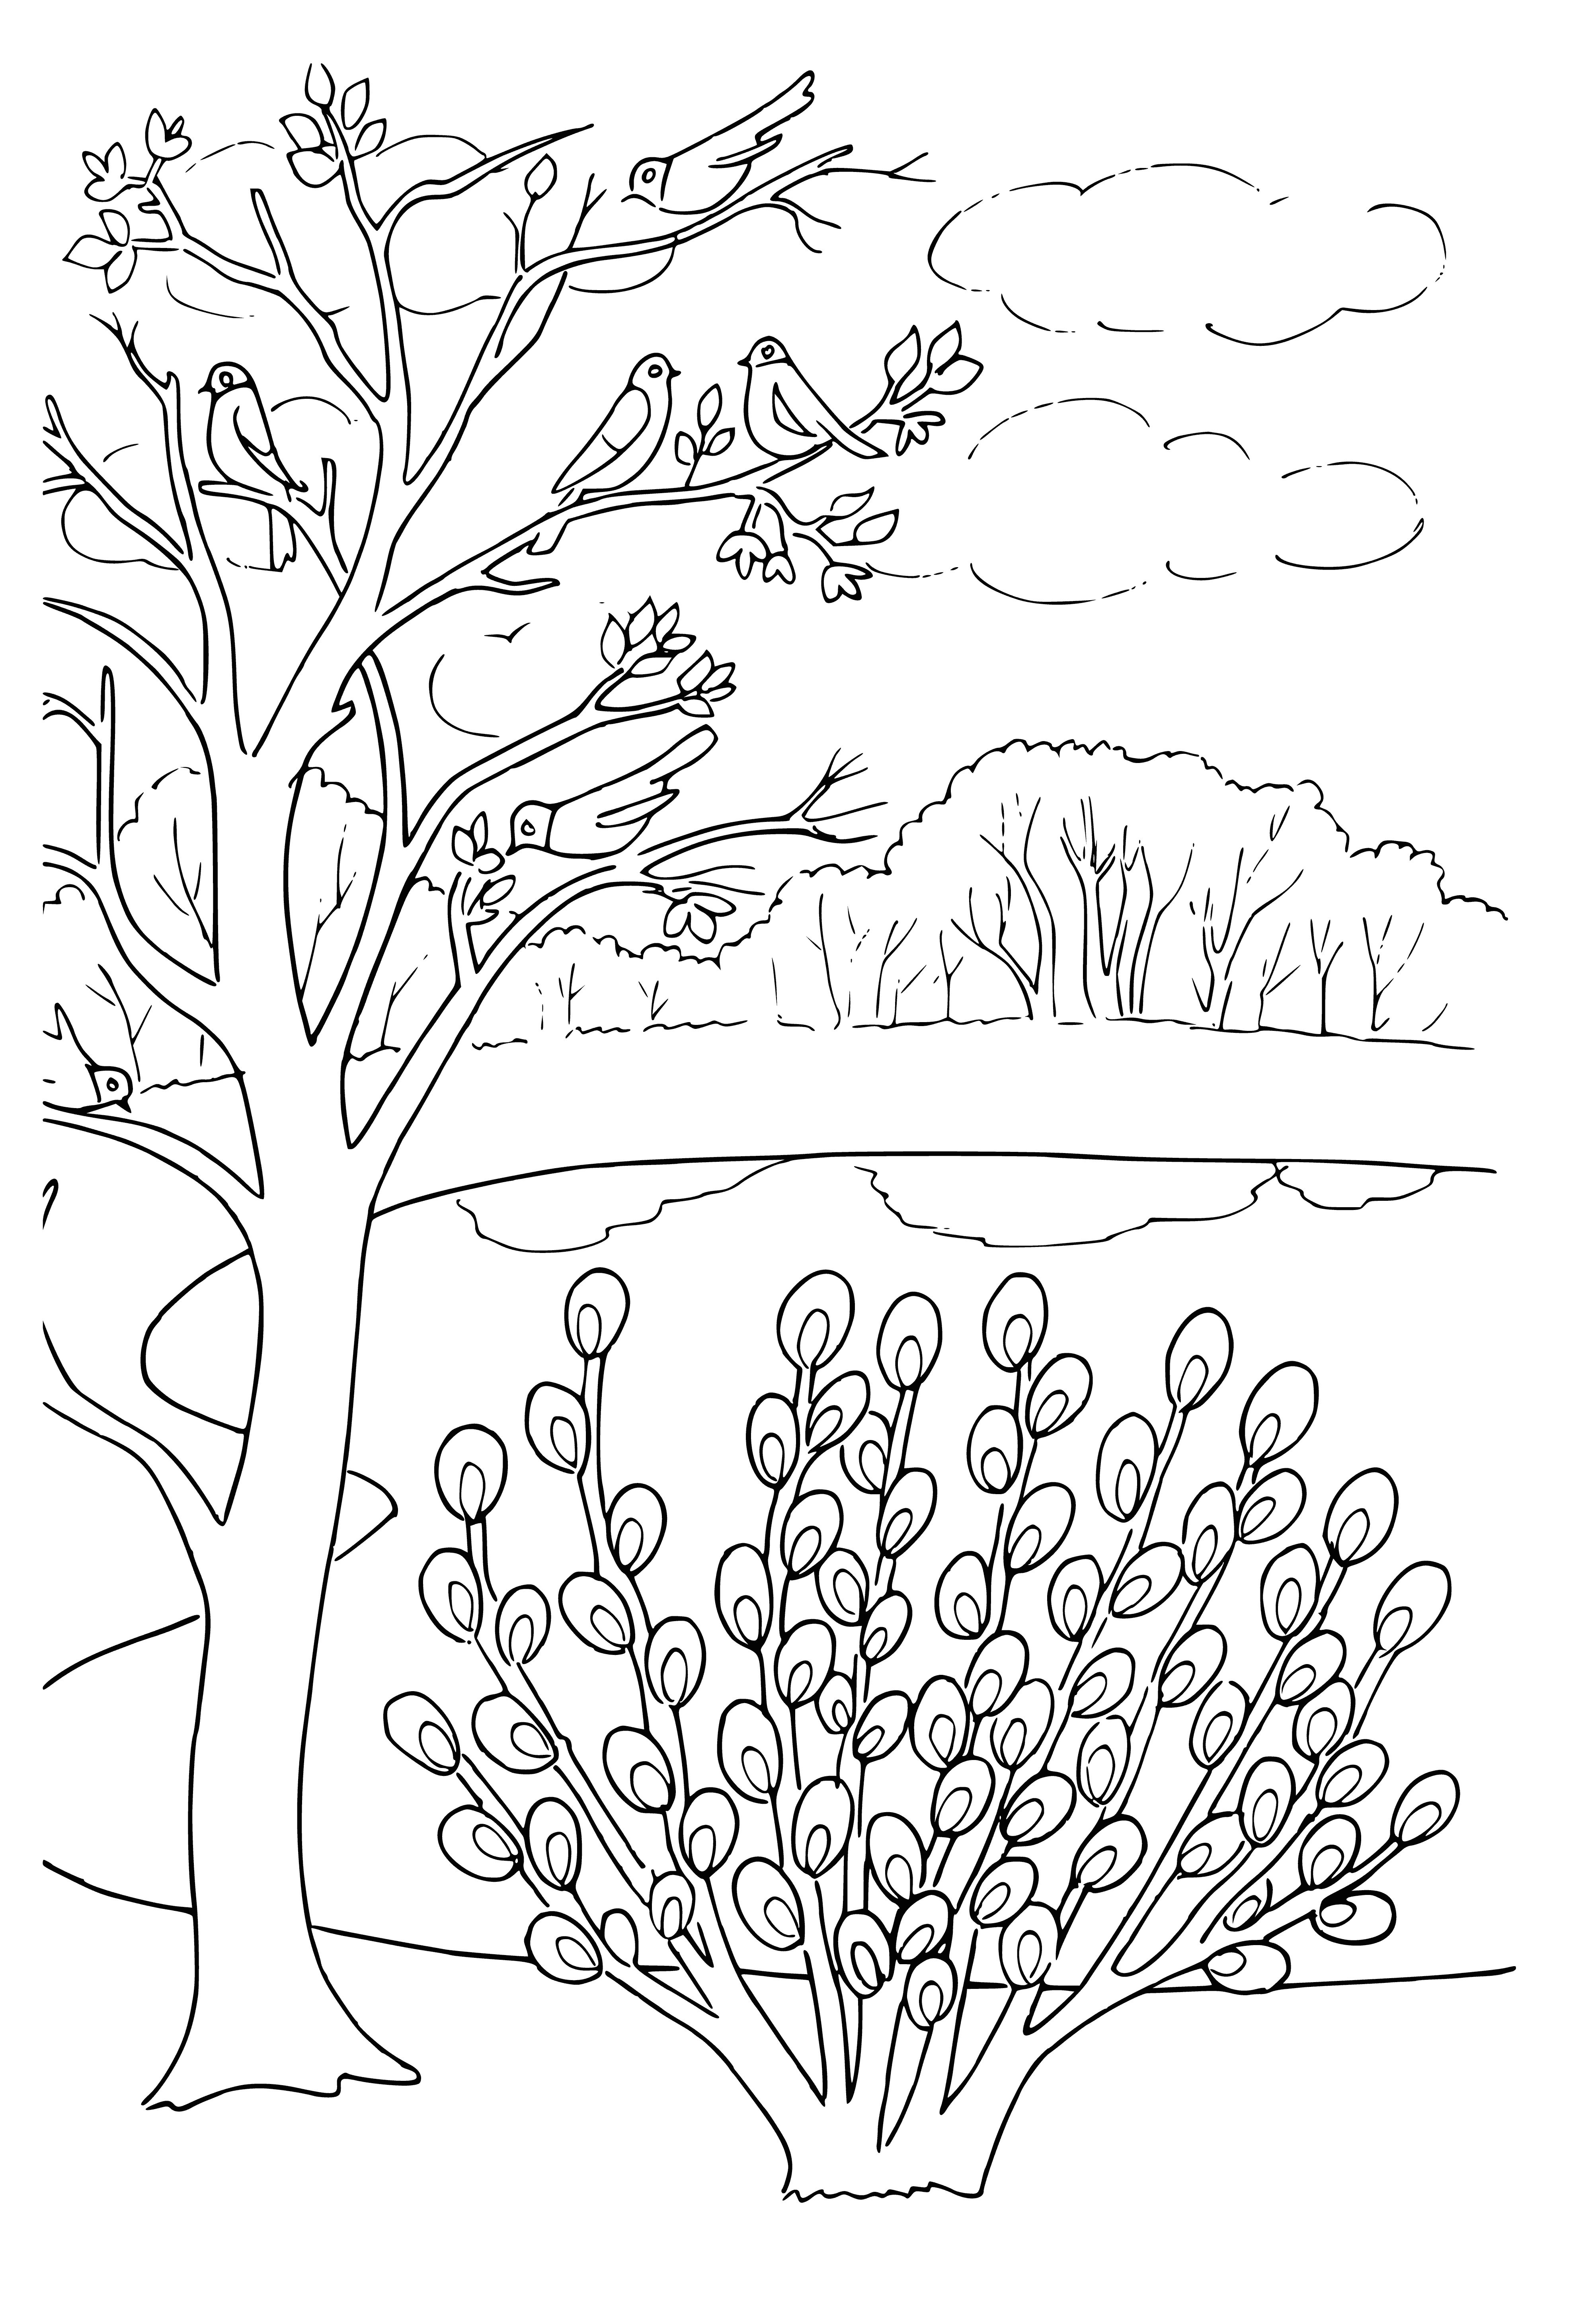 Willow coloring page